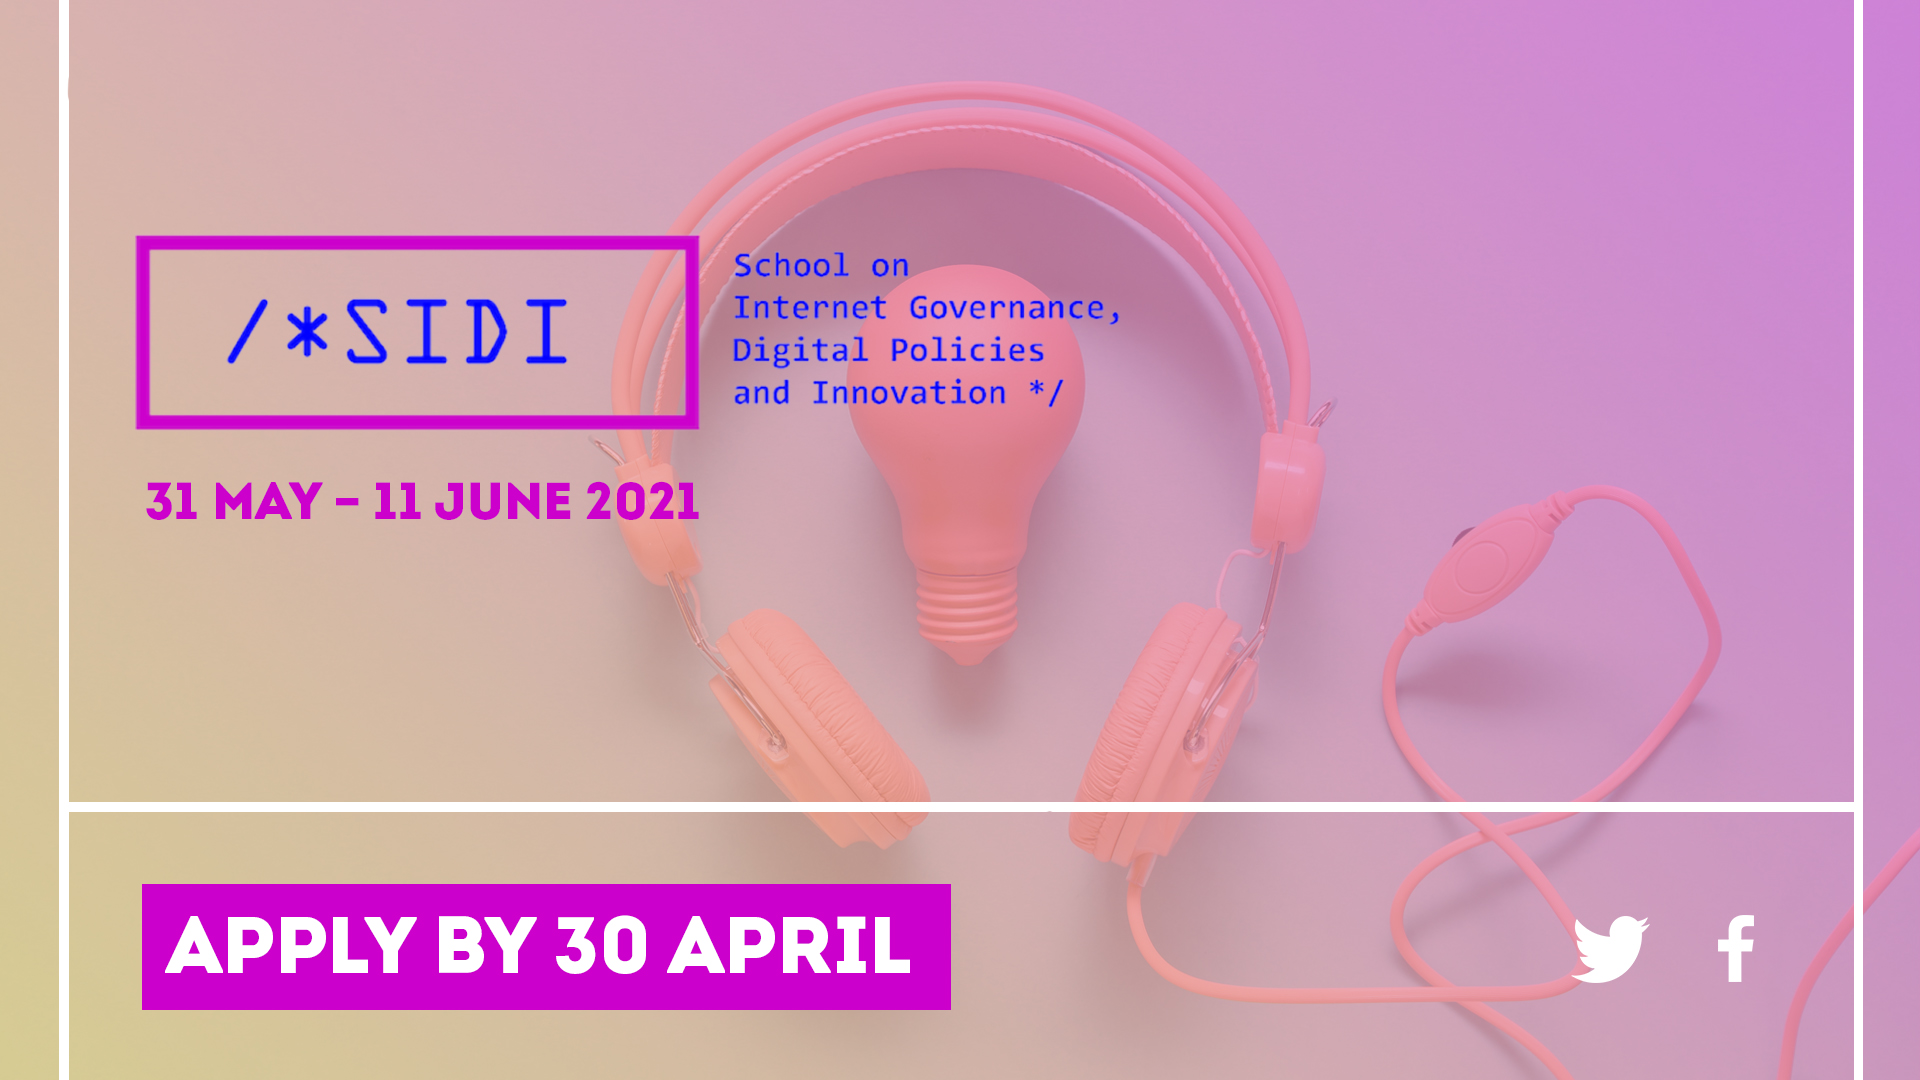 SIDI is designed for graduate students and professionals keen to learn more about digital innovation, the impact of the Internet and other digital technologies on our society and economy, as well as the multiple dimensions of digital policy and Internet governance.